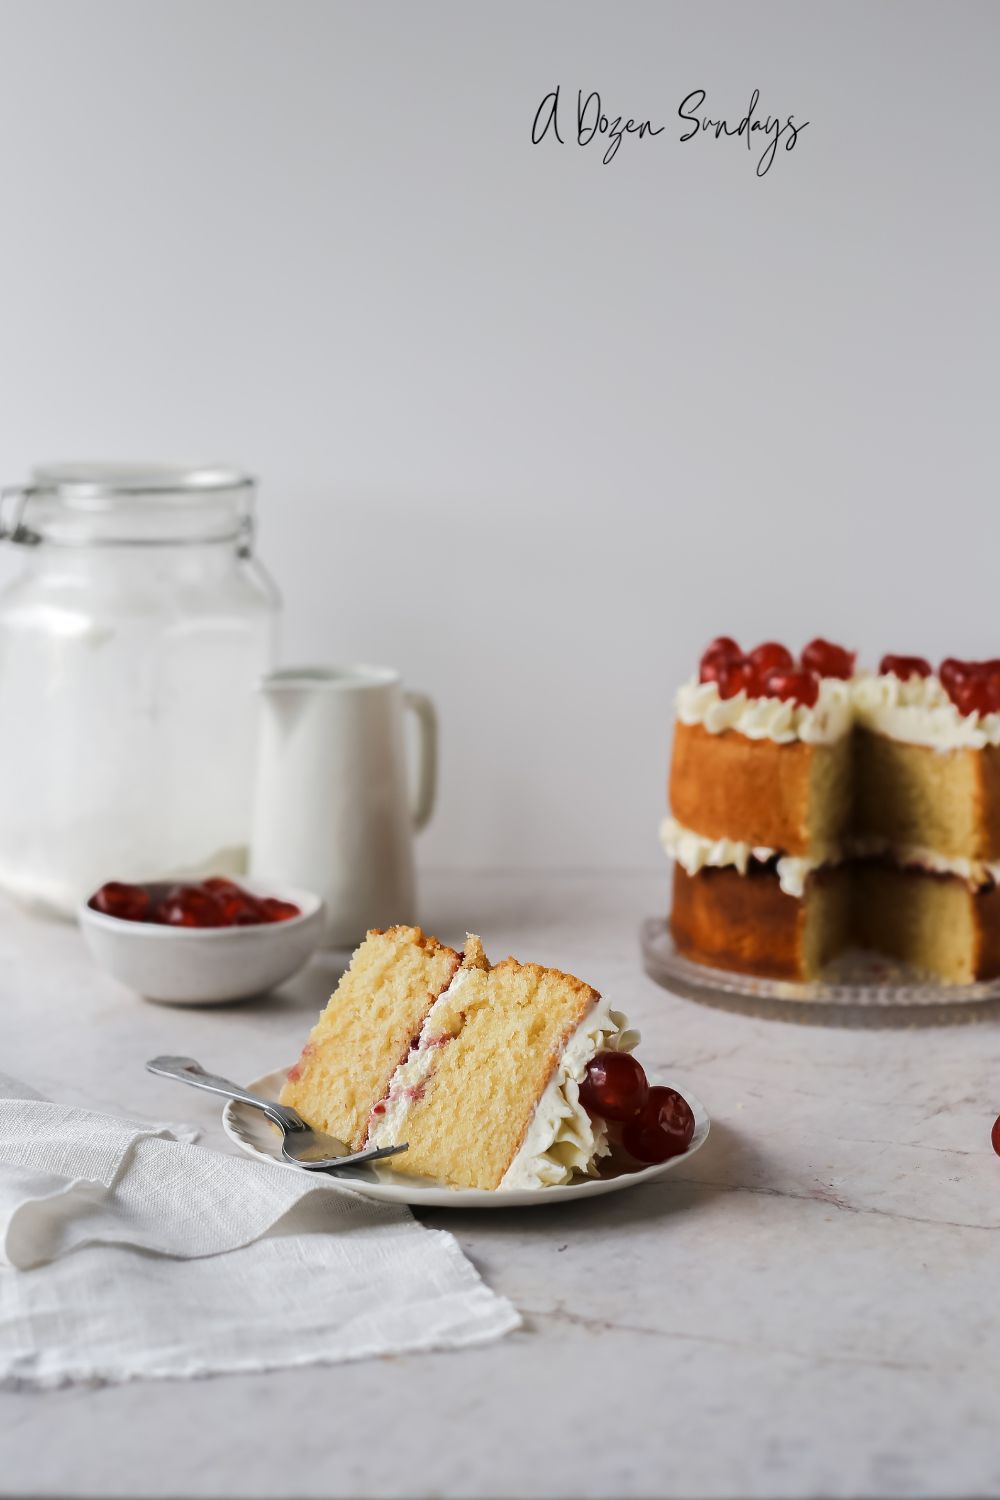 A slice of cake on a plate with the cake behind - easy Cherry Bakewell cake recipe from A Dozen Sundays